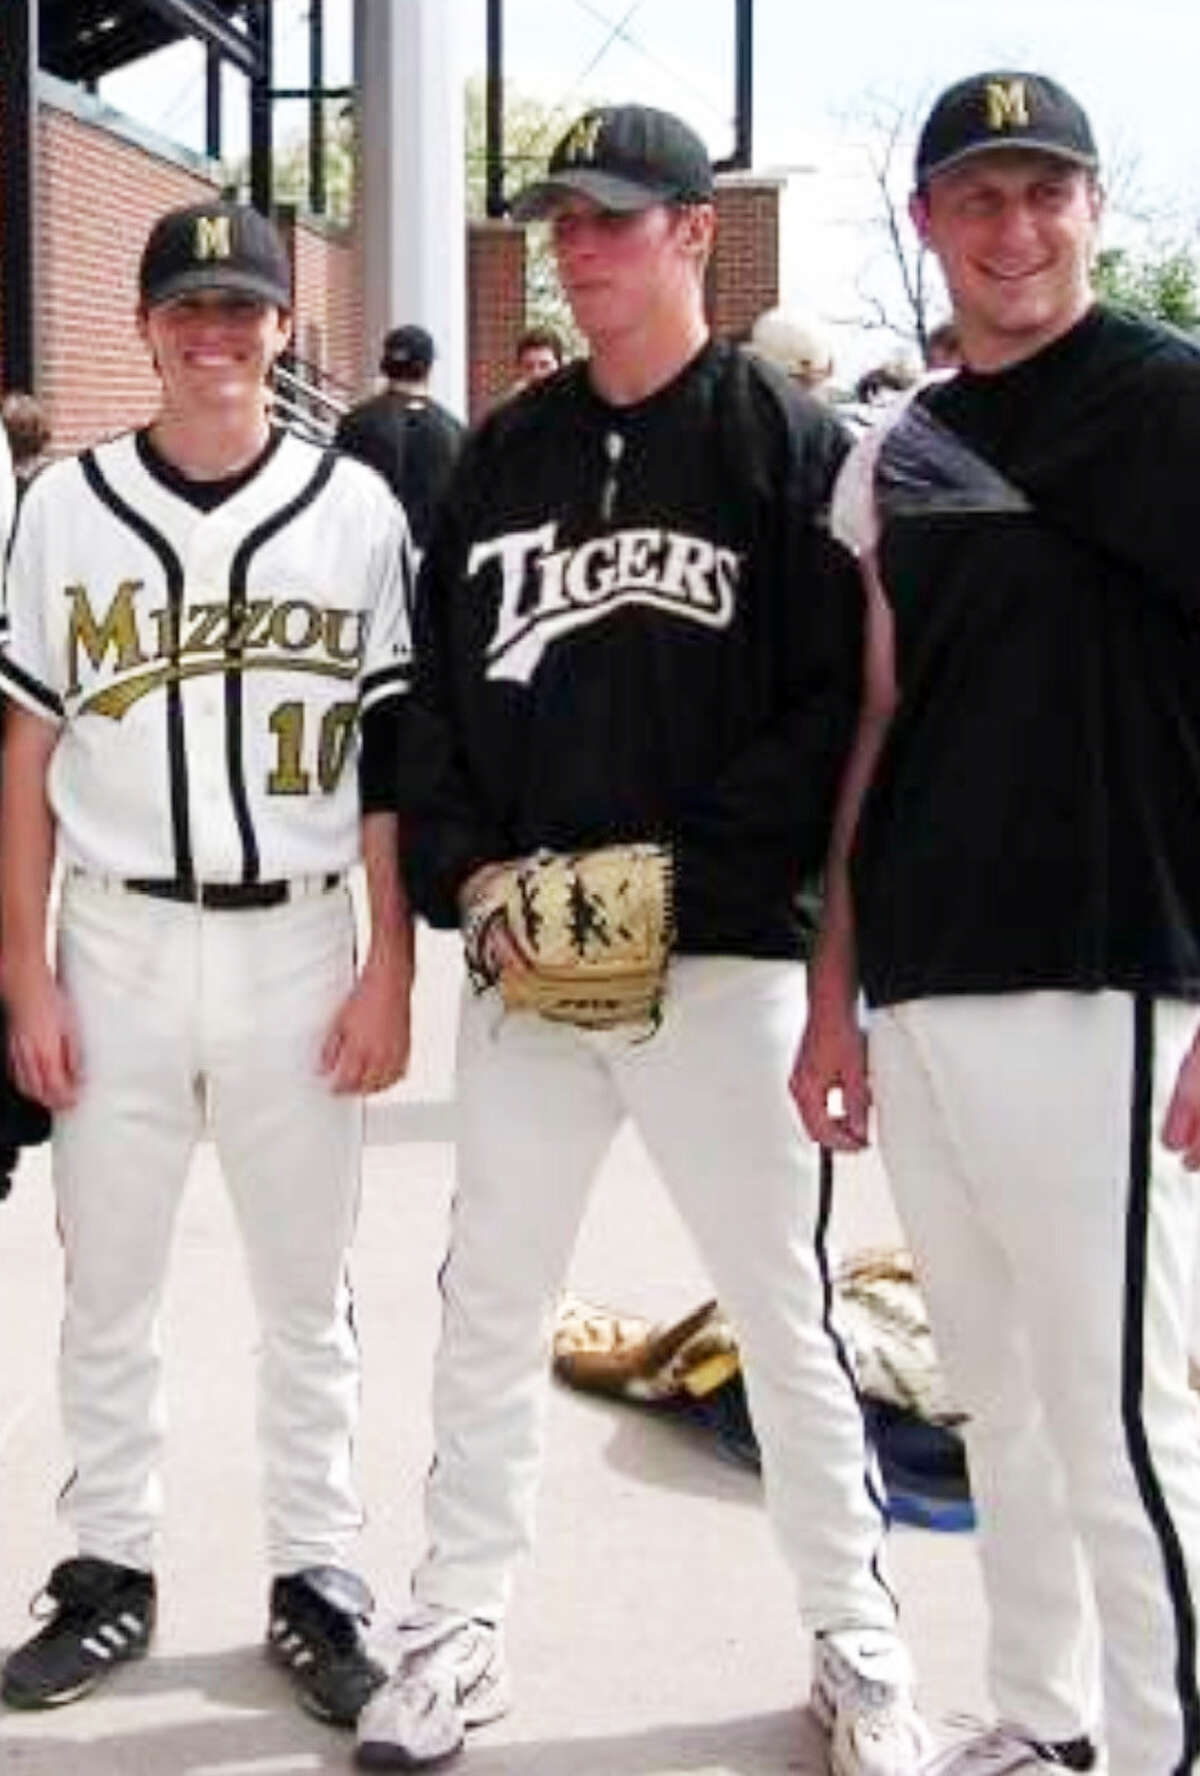 Edwardsville graduate Nathan Culp, with University of Missouri teammates Max Scherzer, right, and Taylor Parker in 2006.